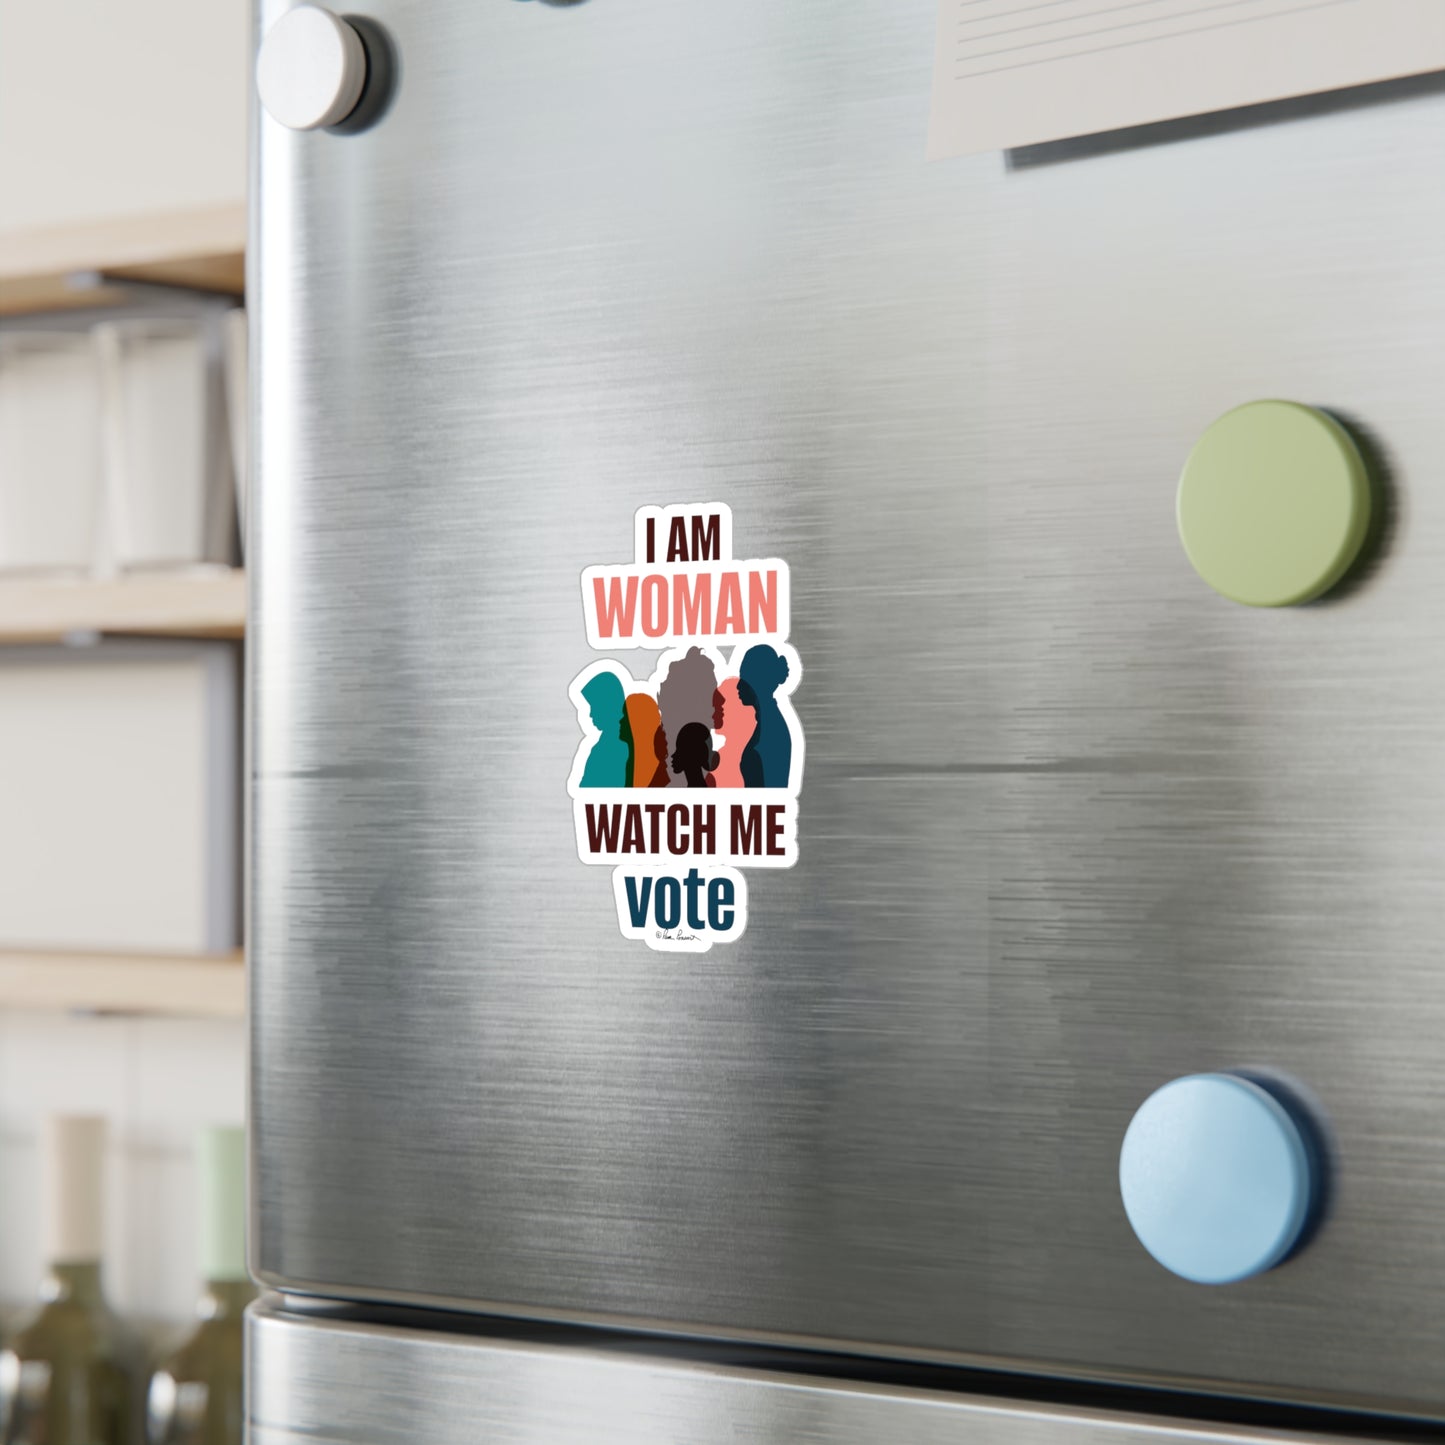 A stainless steel refrigerator door adorned with a colorful Printify Voting Women's Decals that says "i am woman watch me vote" featuring silhouettes of three women.